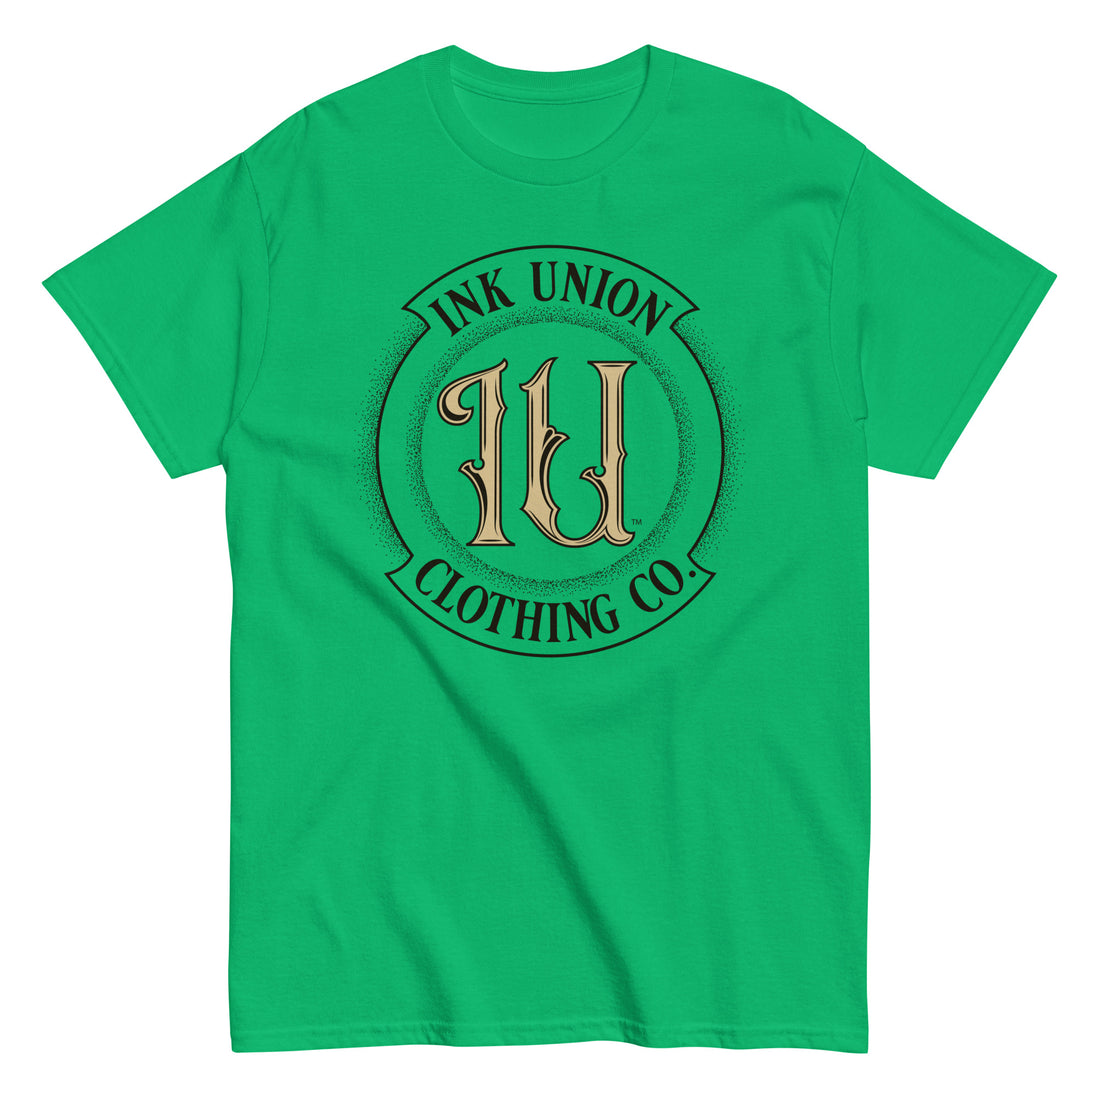 A bright green t-shirt with the Ink Union Clothing Co Badge logo in black and gold centered on the front of the shirt.